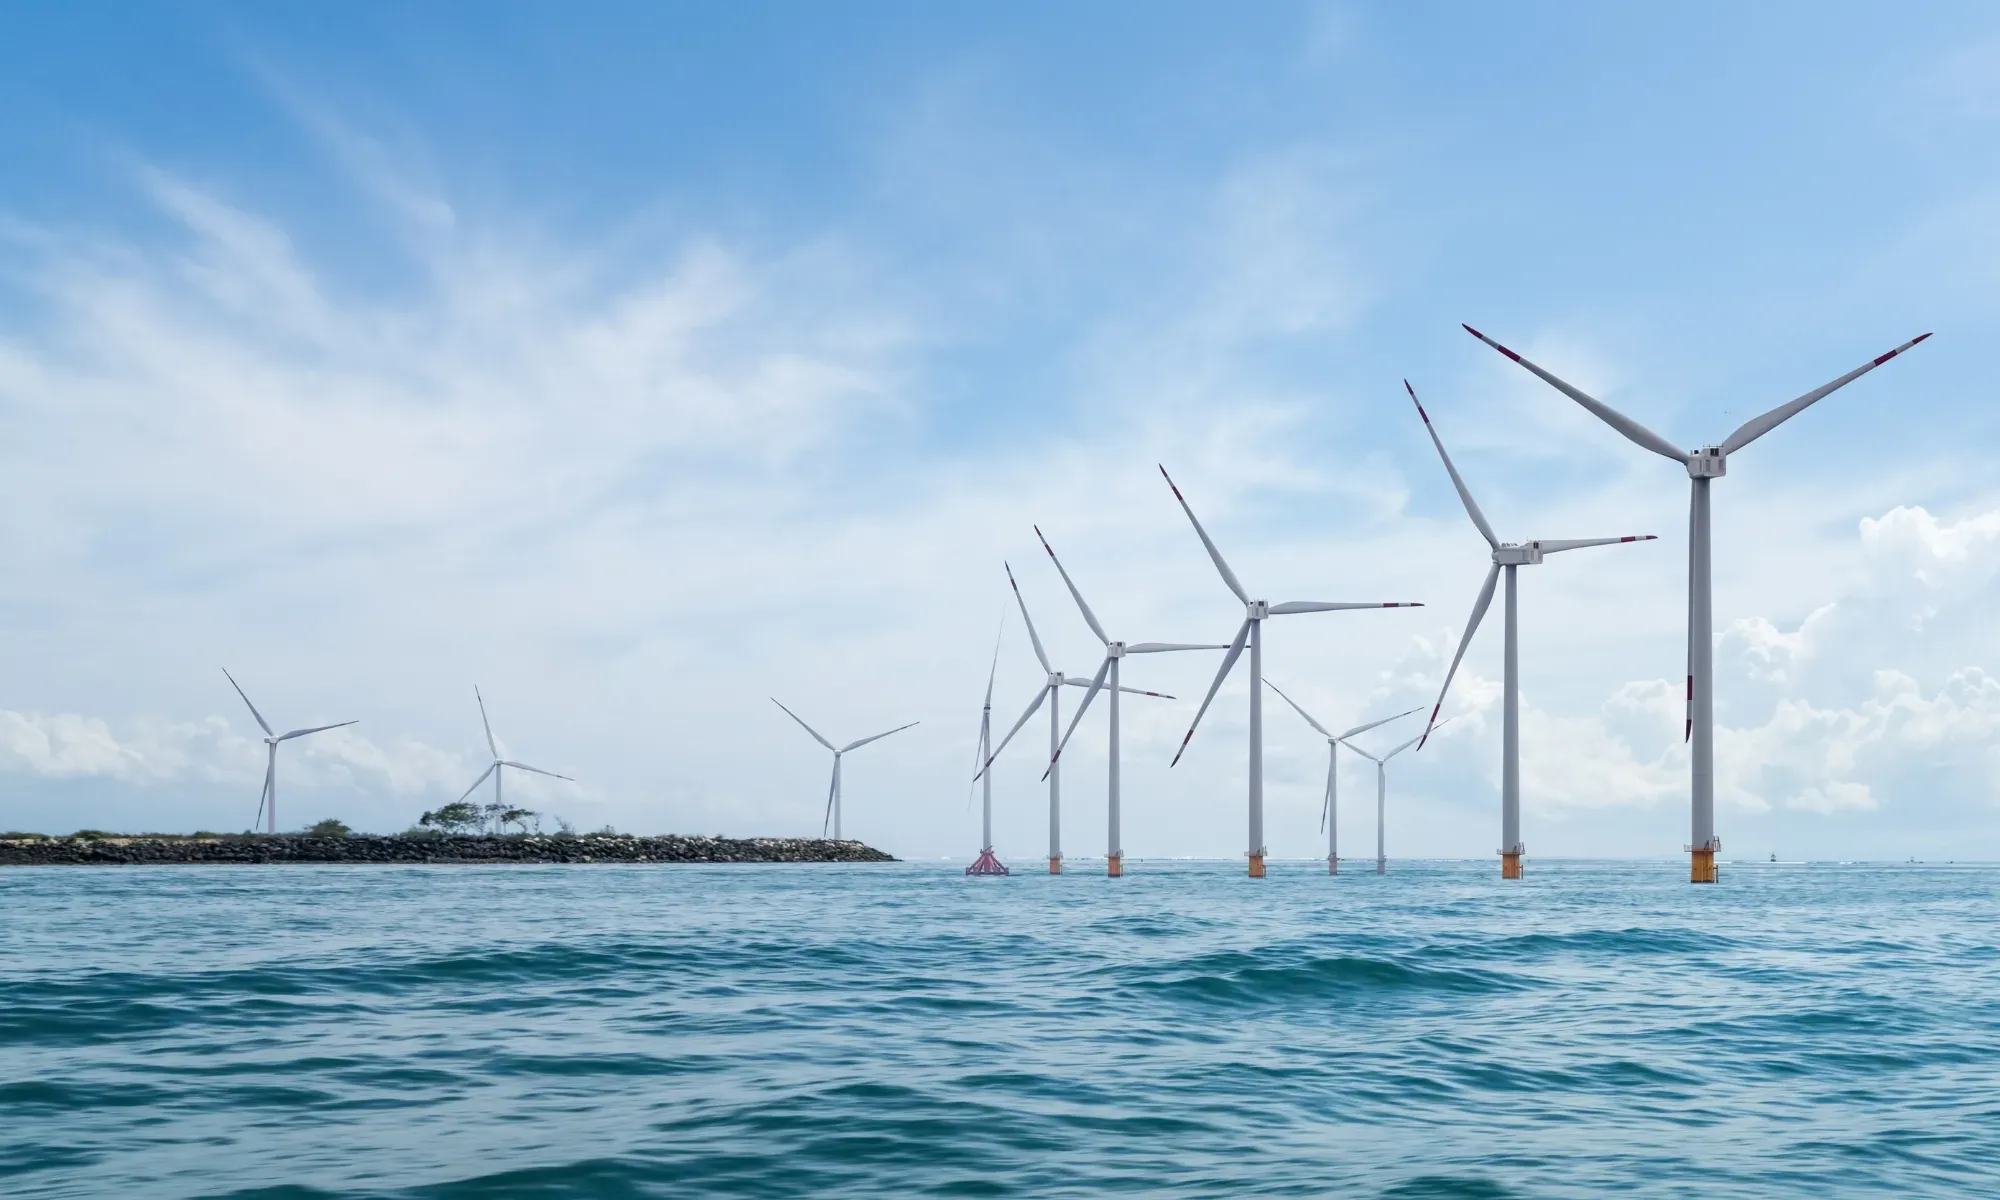 The QHSE Partnership Enables Successful Wind Turbine Projects Worldwide